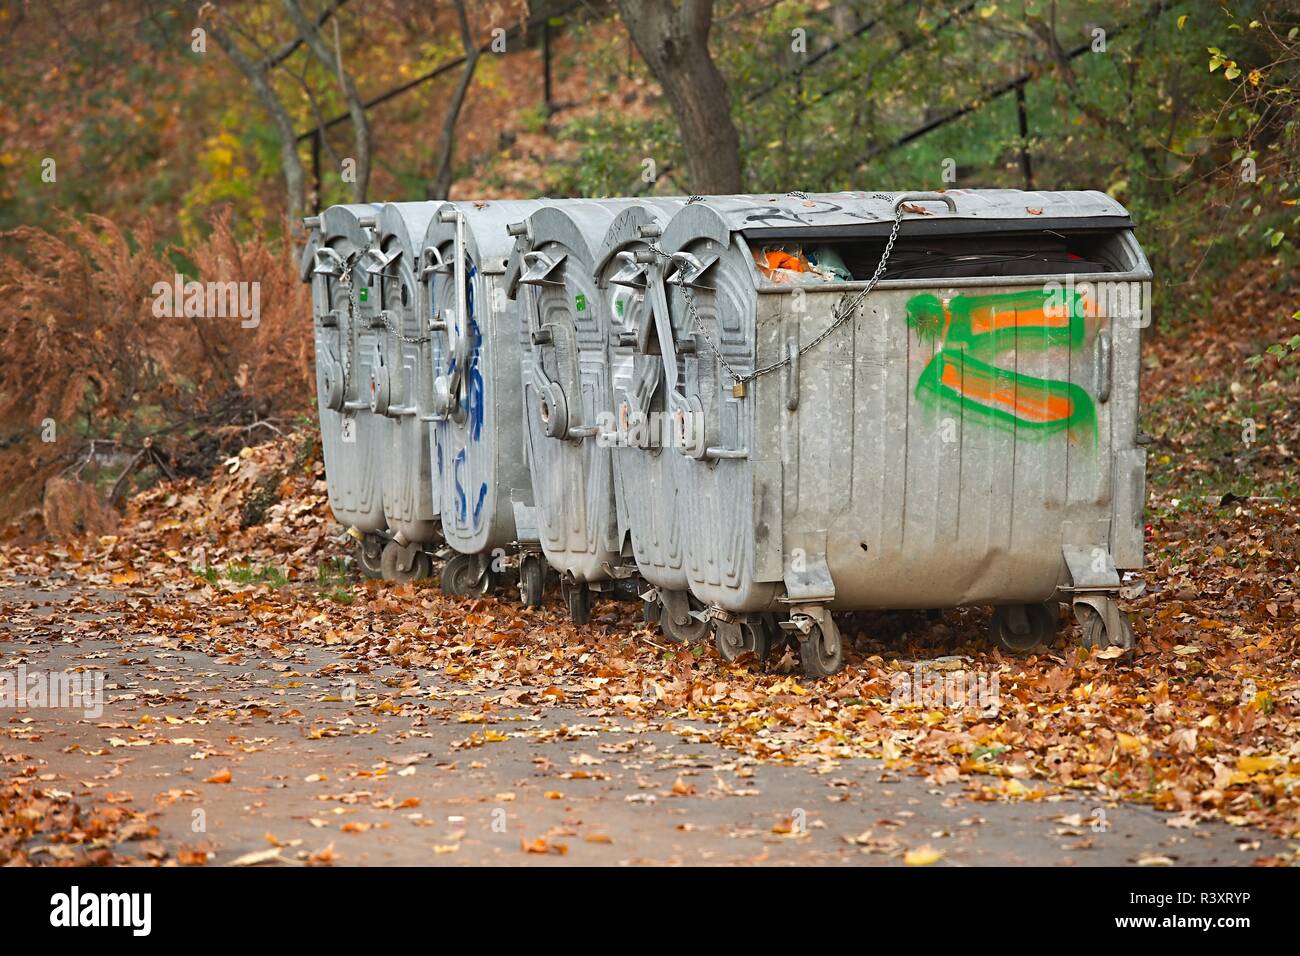 https://c8.alamy.com/comp/R3XRYP/garbage-containers-R3XRYP.jpg